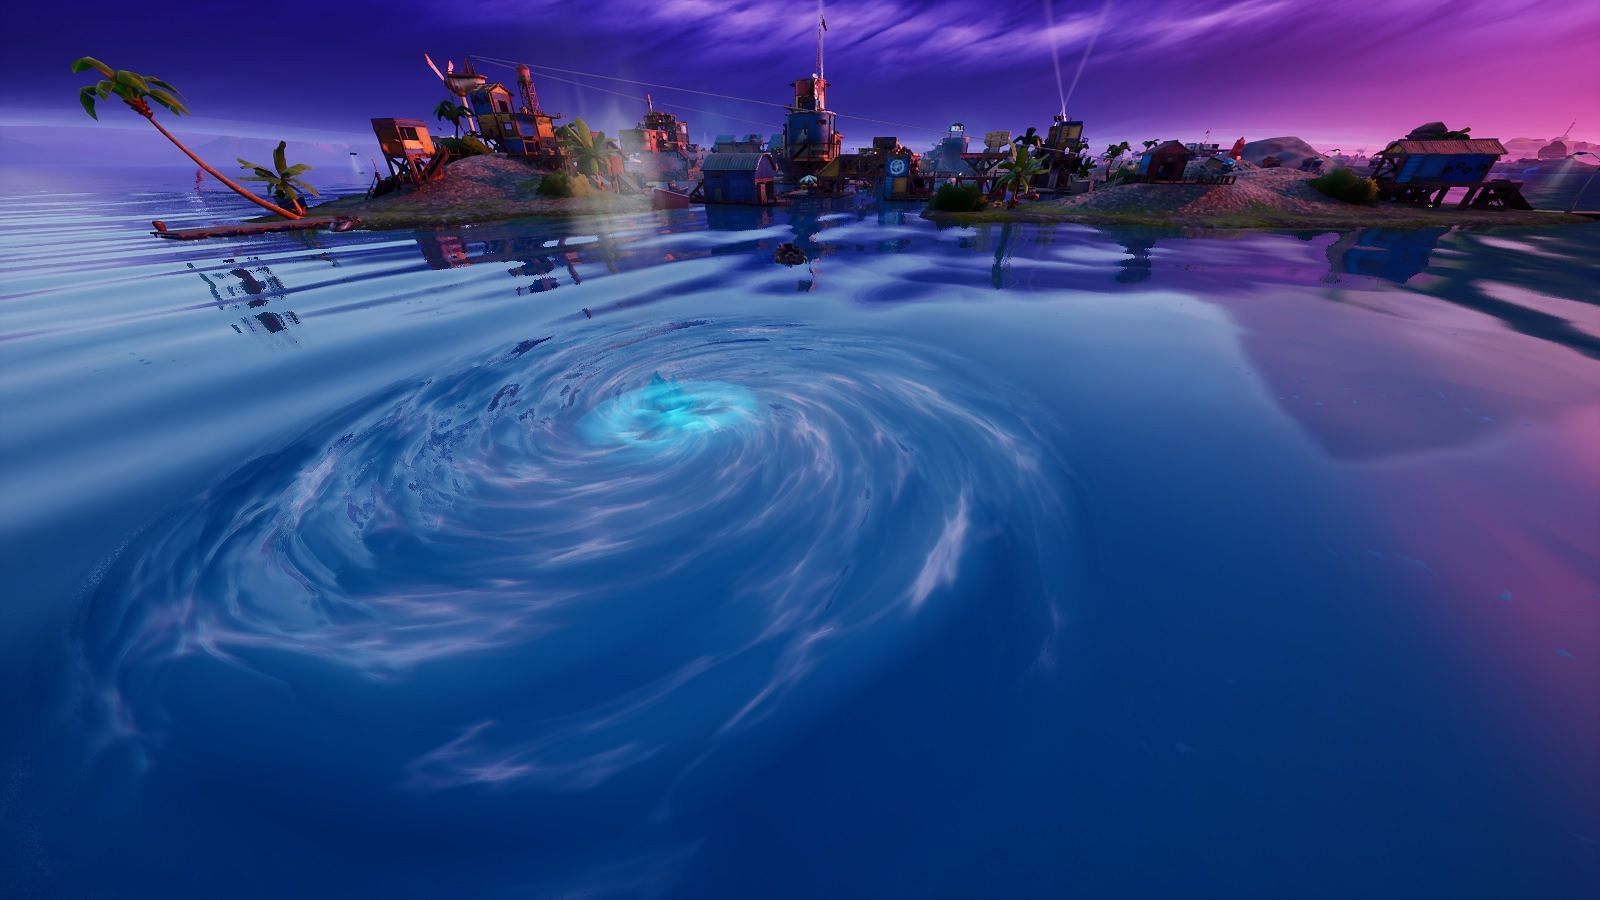 Whirlpools from Chapter 2 Season 3 might be coming back to Fortnite (Image via Twitter/ Mr. GI)